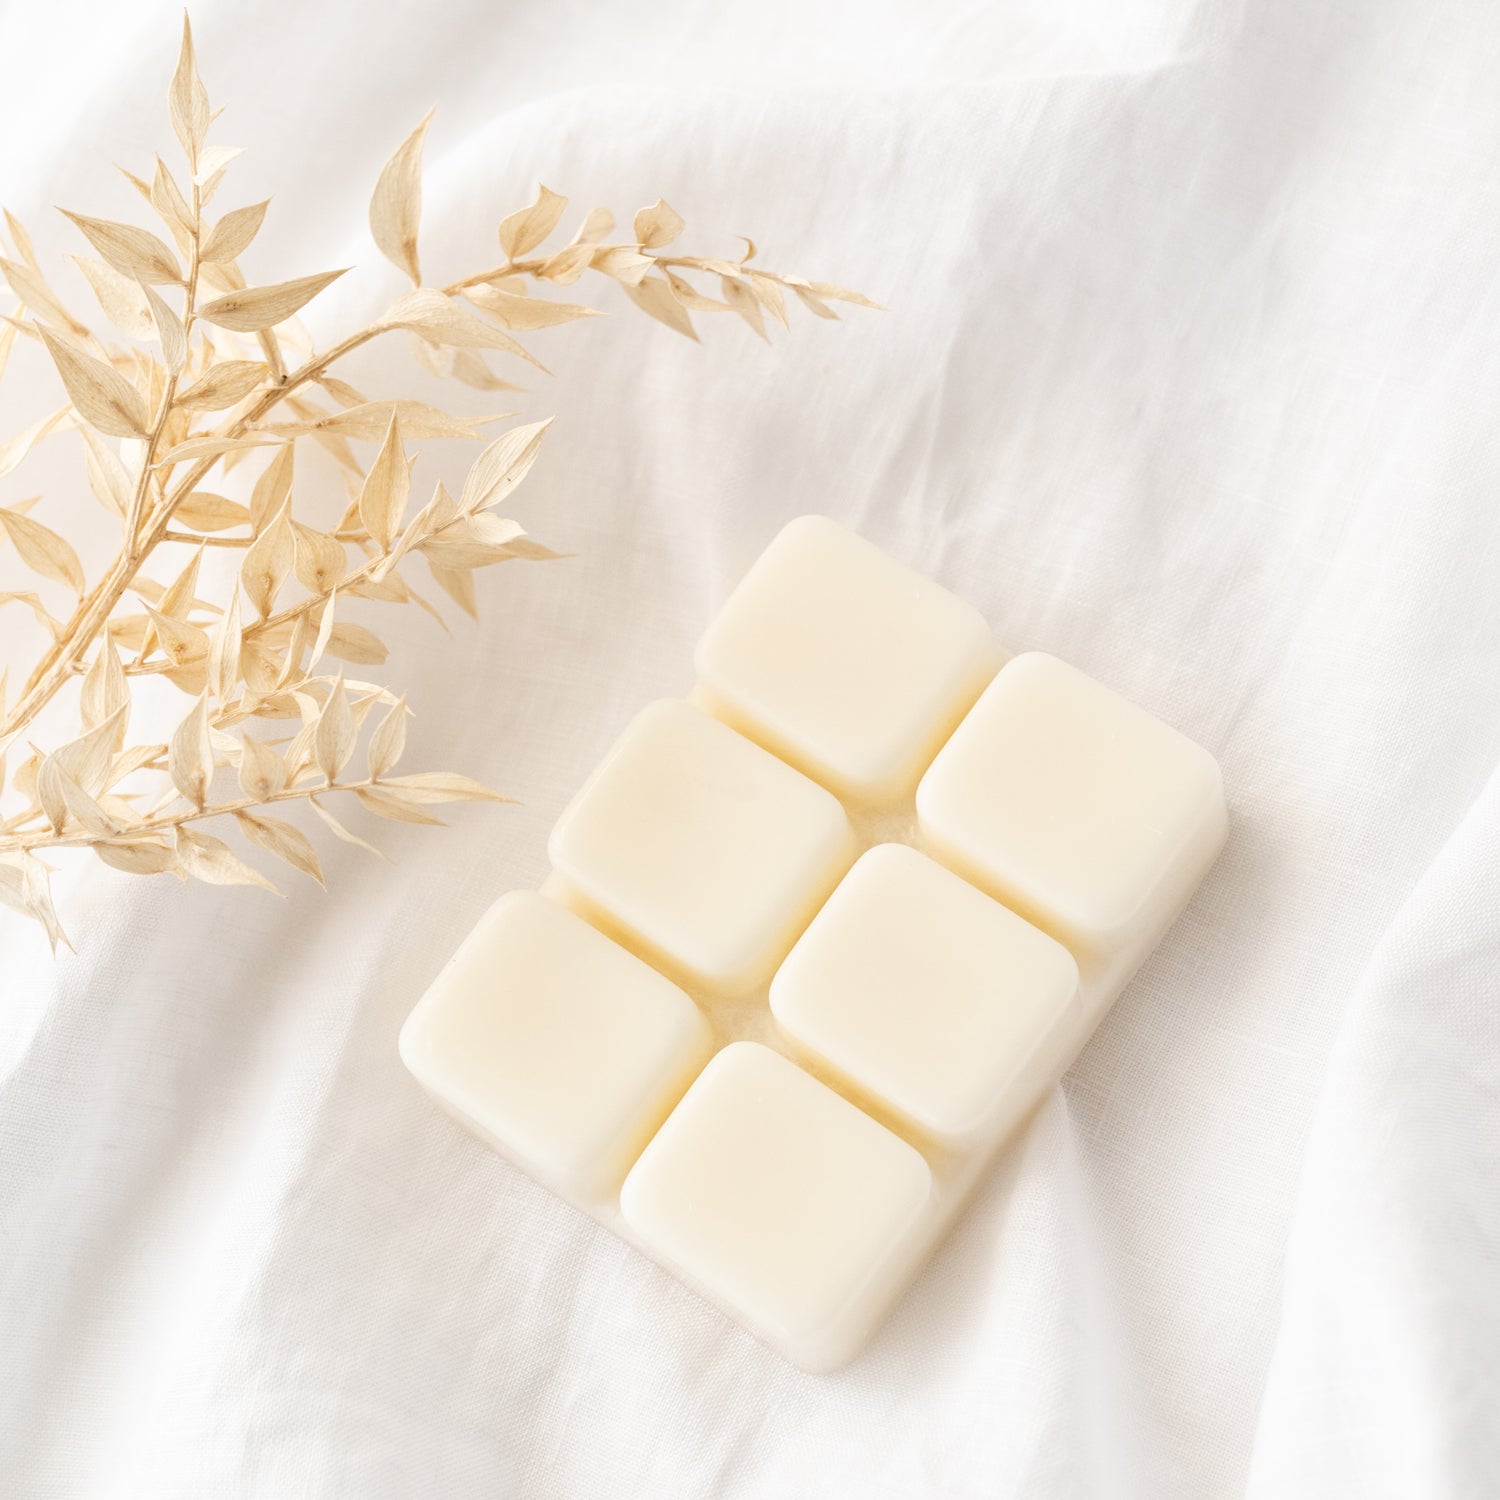 6 cube white wax melt against white background with cream flowers